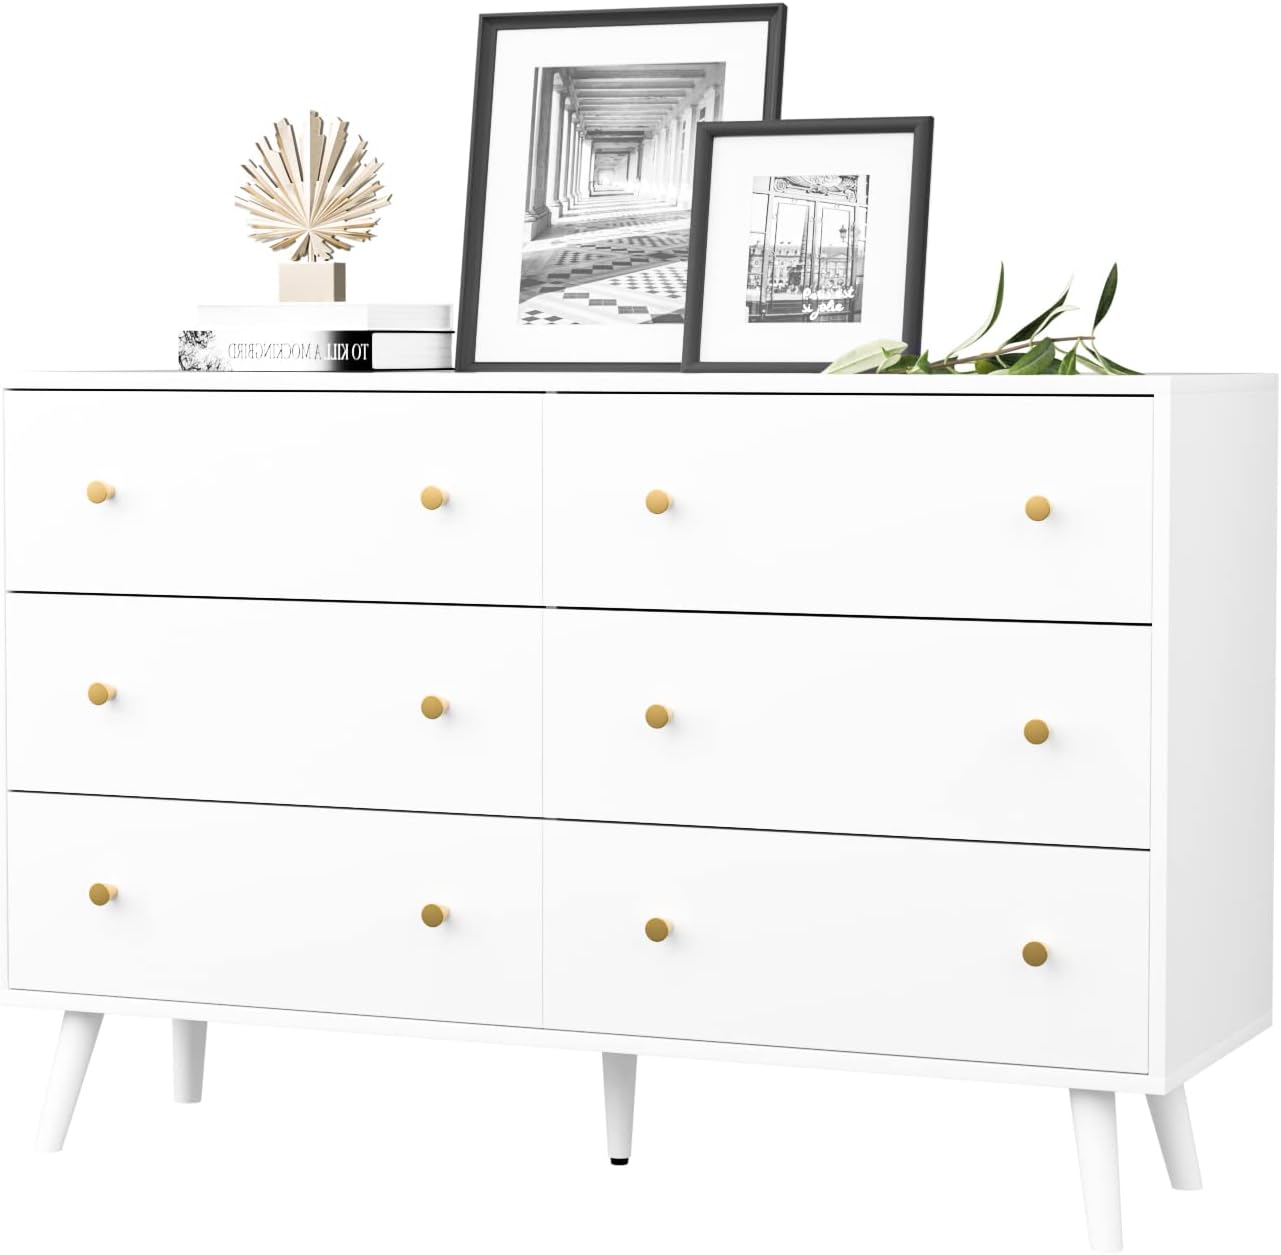 The sleek lines and appealing simplicity of this piece completely revamped the appearance of my bedroom in an instant. While the gold knobs on each drawer provide a stylish contrast and contribute to the overall luxury atmosphere, the white finish lends an air of elegance to the piece of furniture. It is an easy complement to the furniture and dcor that are already in my bedroom, and it helps to tie the entire area together in a way that is visually pleasing. The dresser has a surprising amount